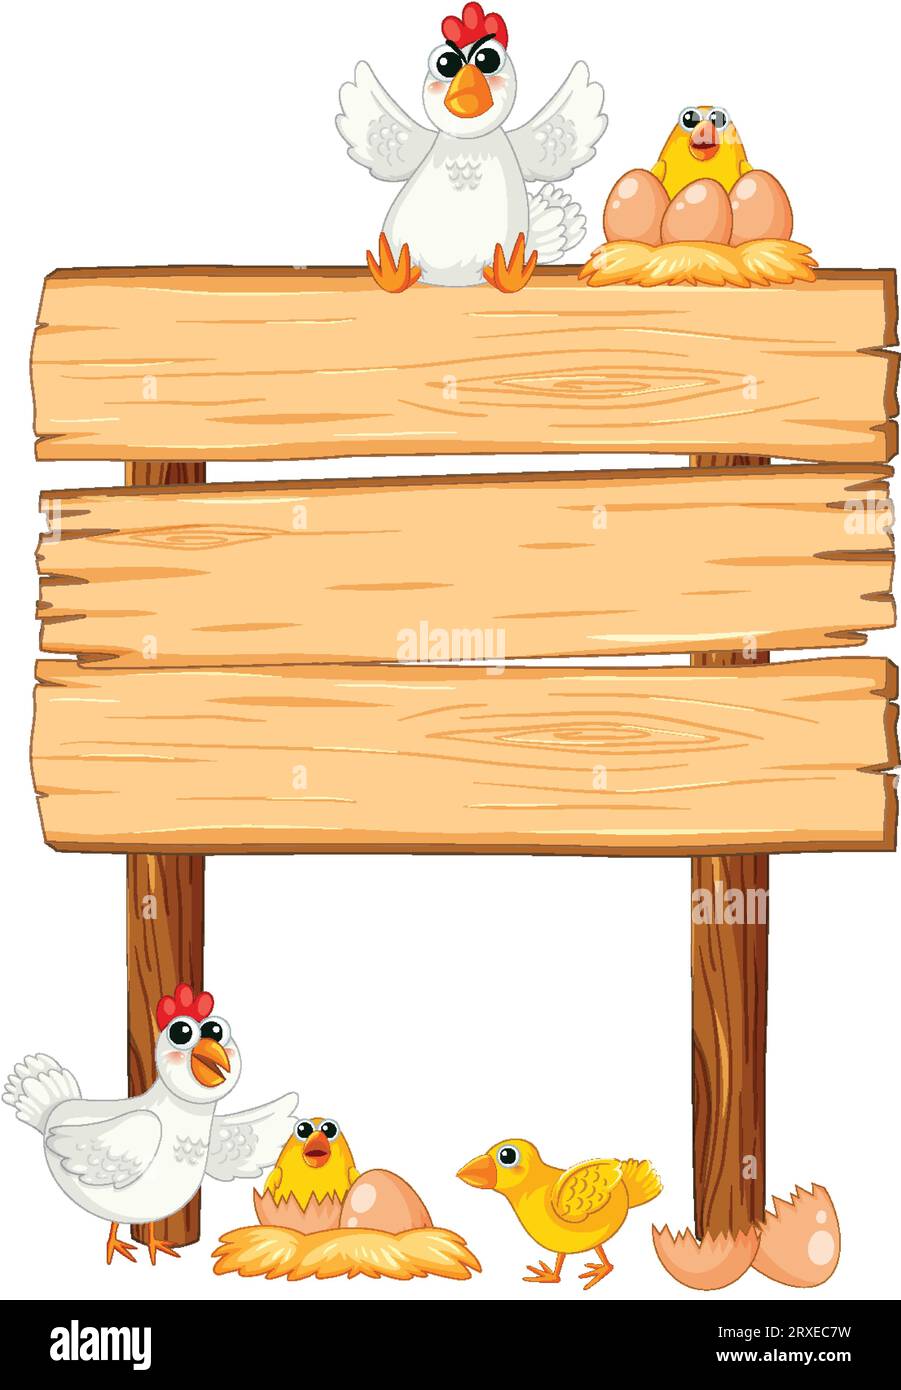 Vector cartoon illustration of a chicken with chicks on a wooden board frame Stock Vector